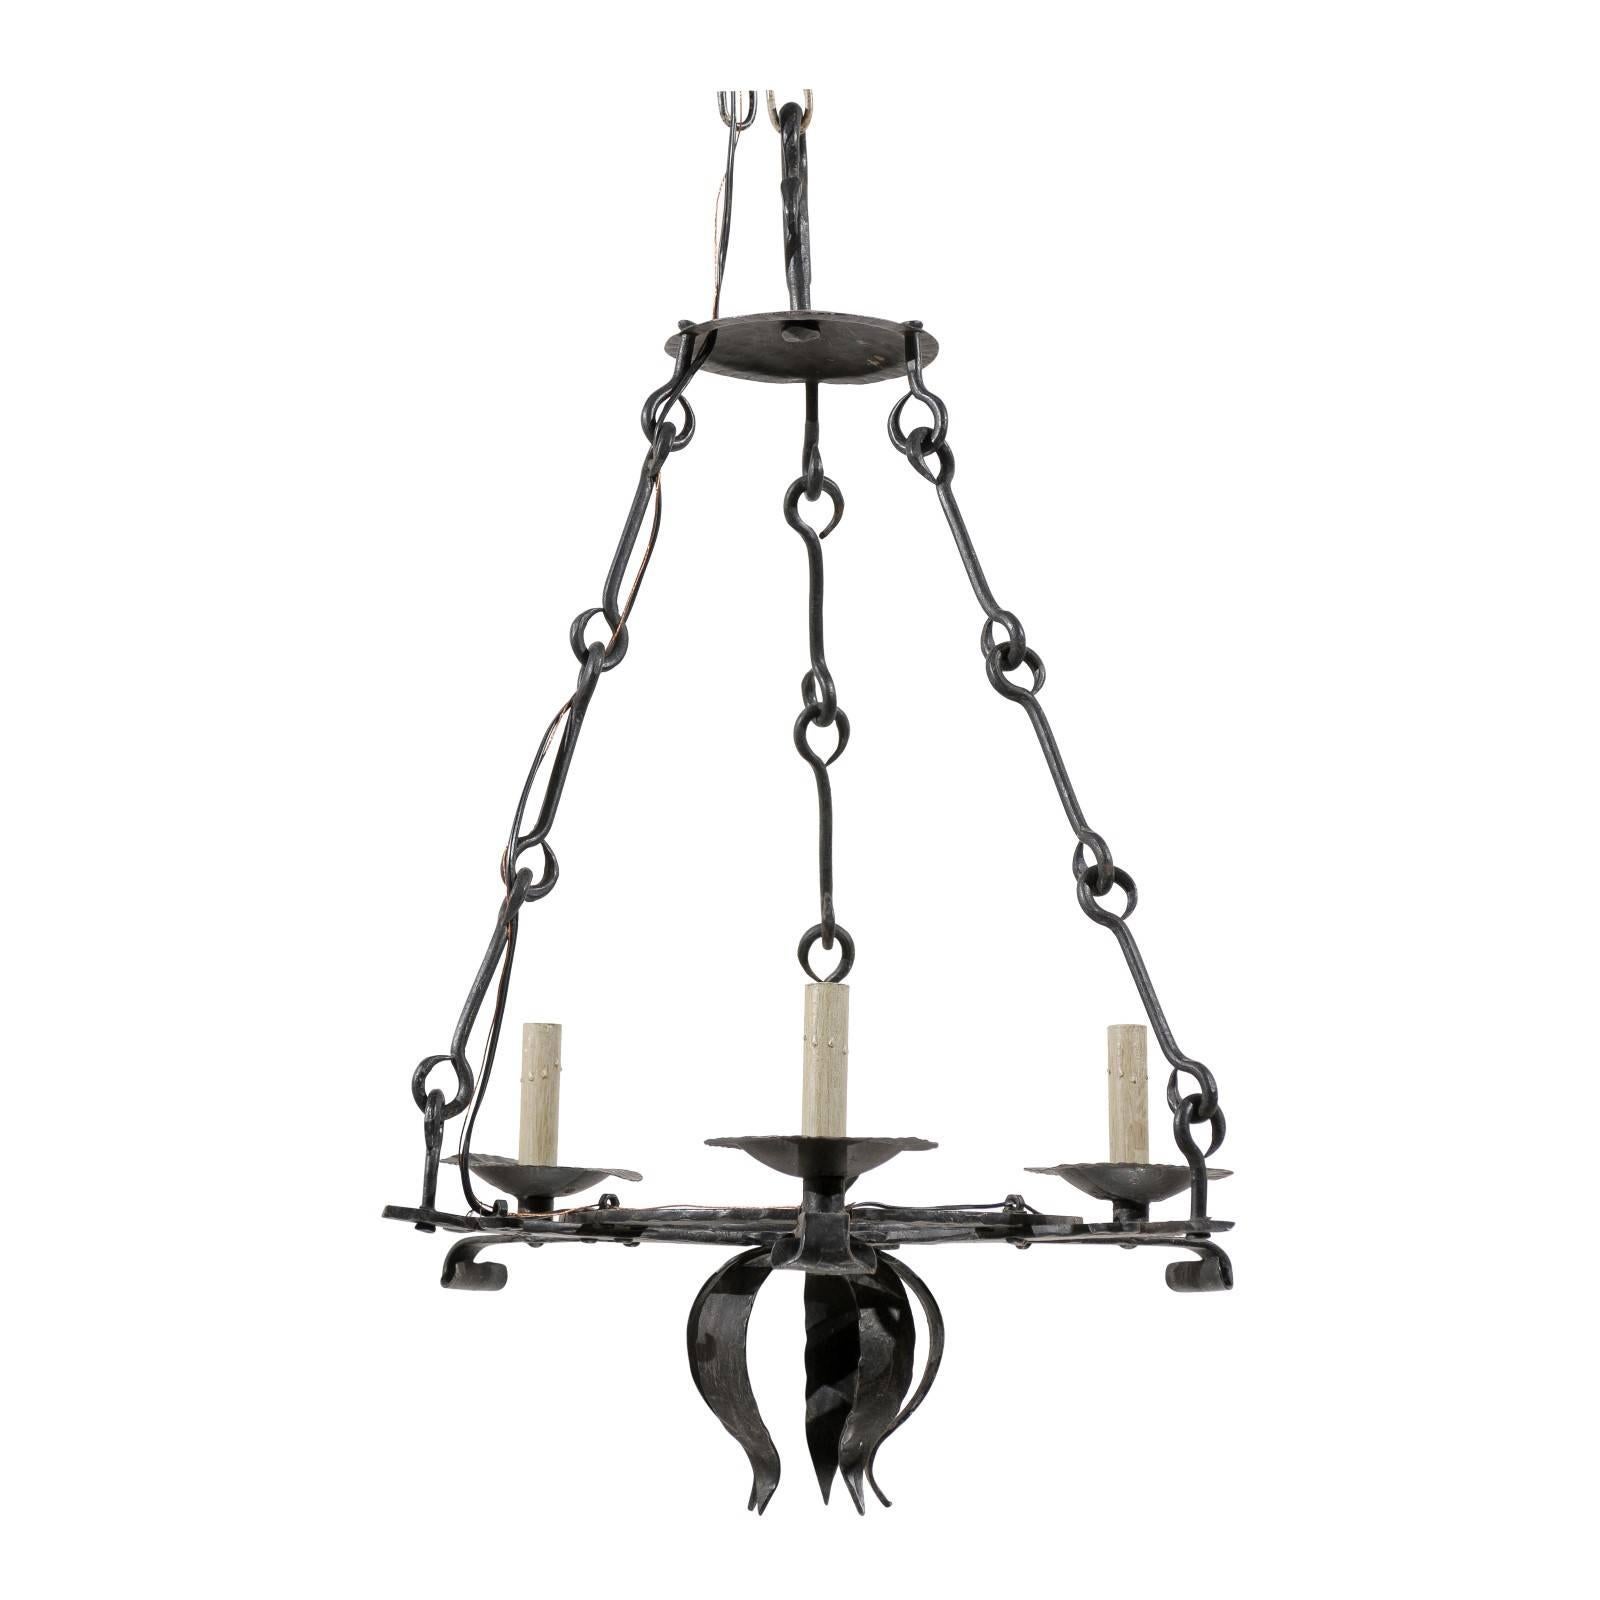 French Black Forged Iron Three-Light Chandelier with Leaf Motif at the Bottom